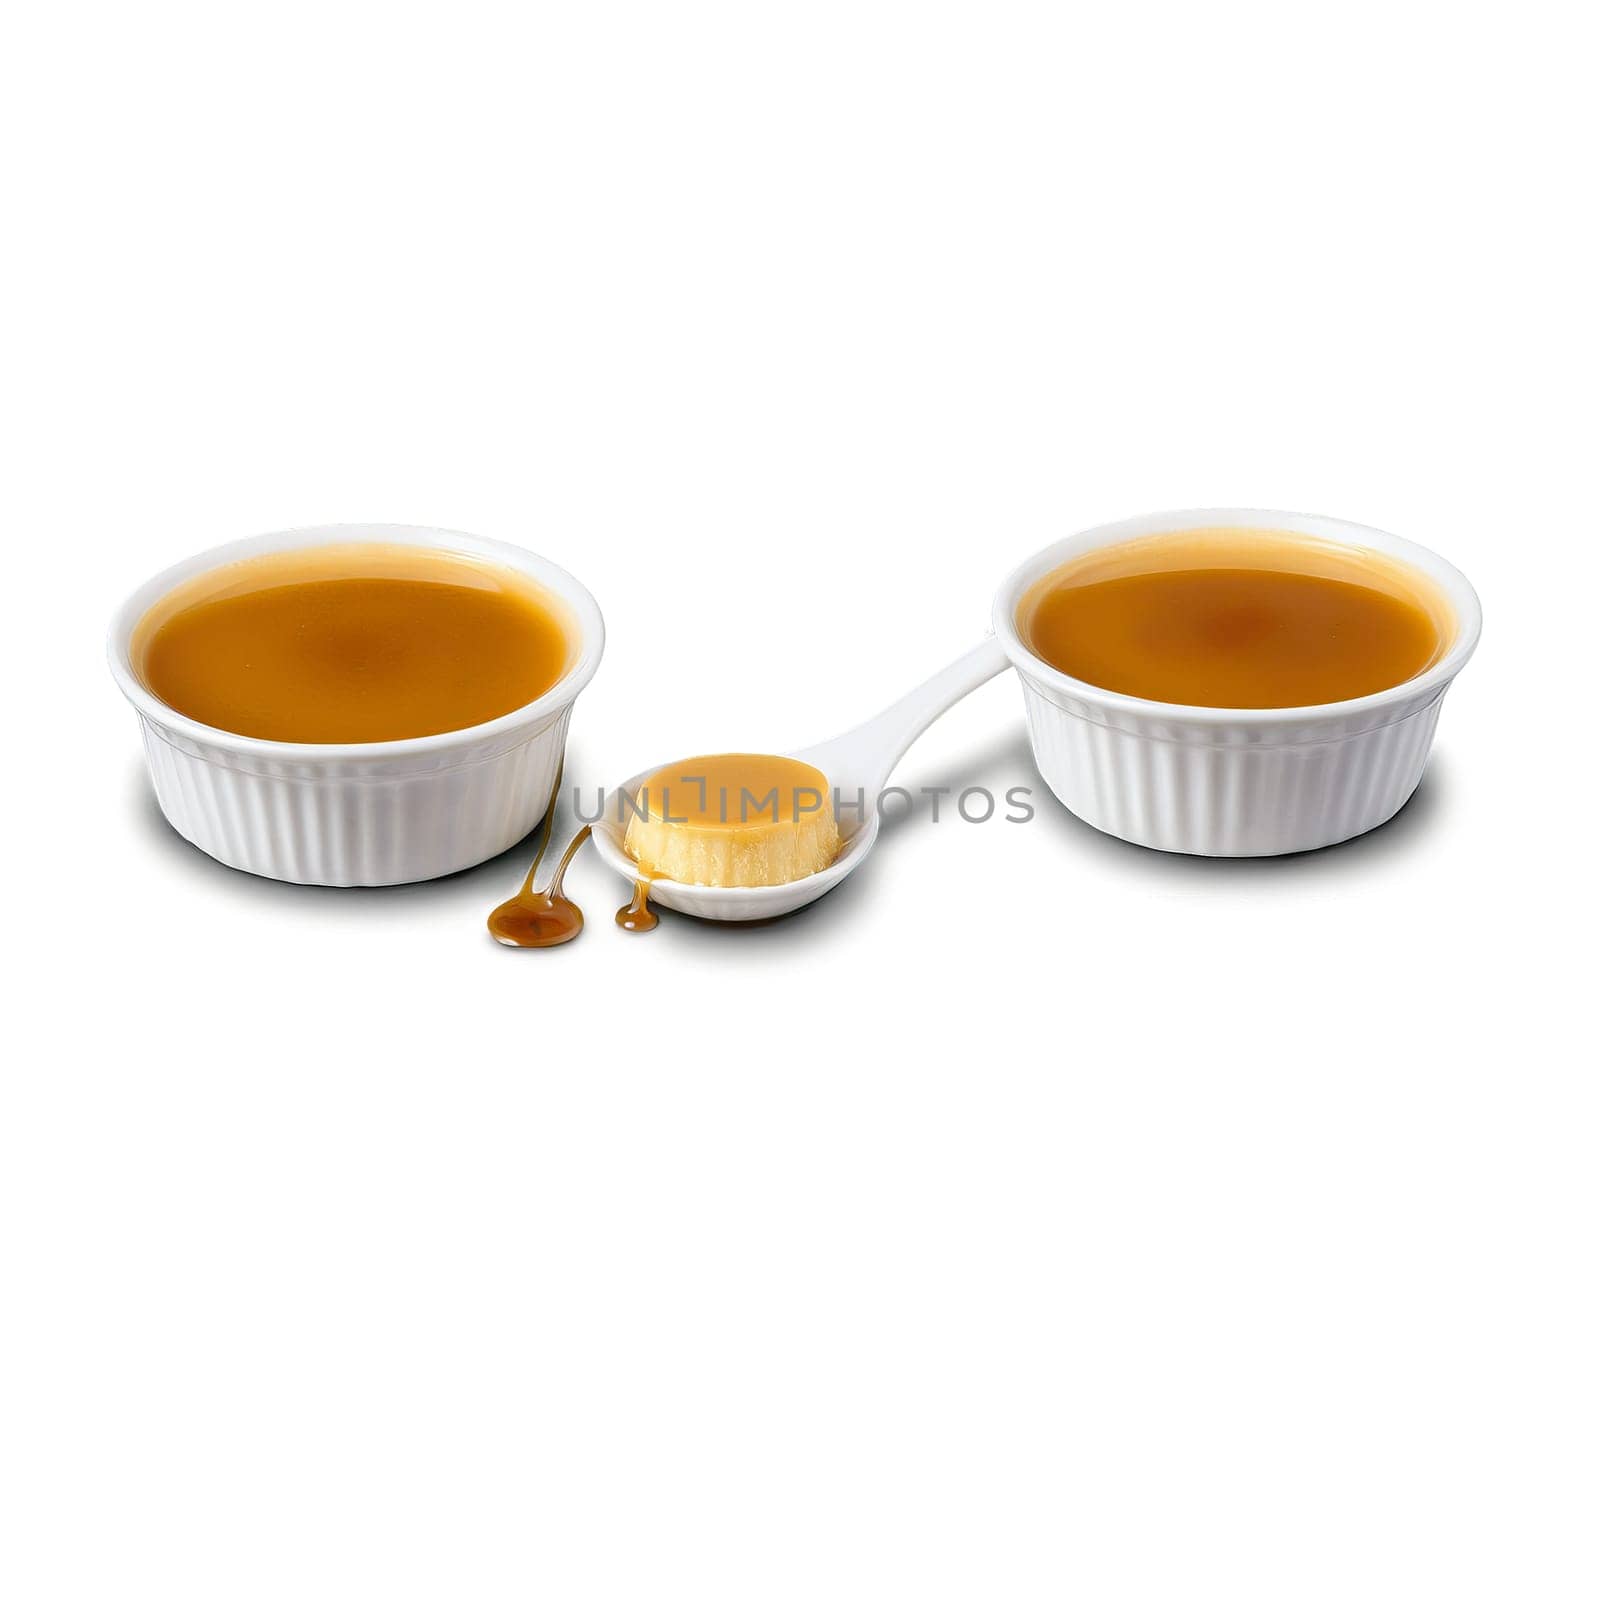 Caramel flan with smooth and creamy texture golden caramel sauce served in a ramekin Culinary by panophotograph